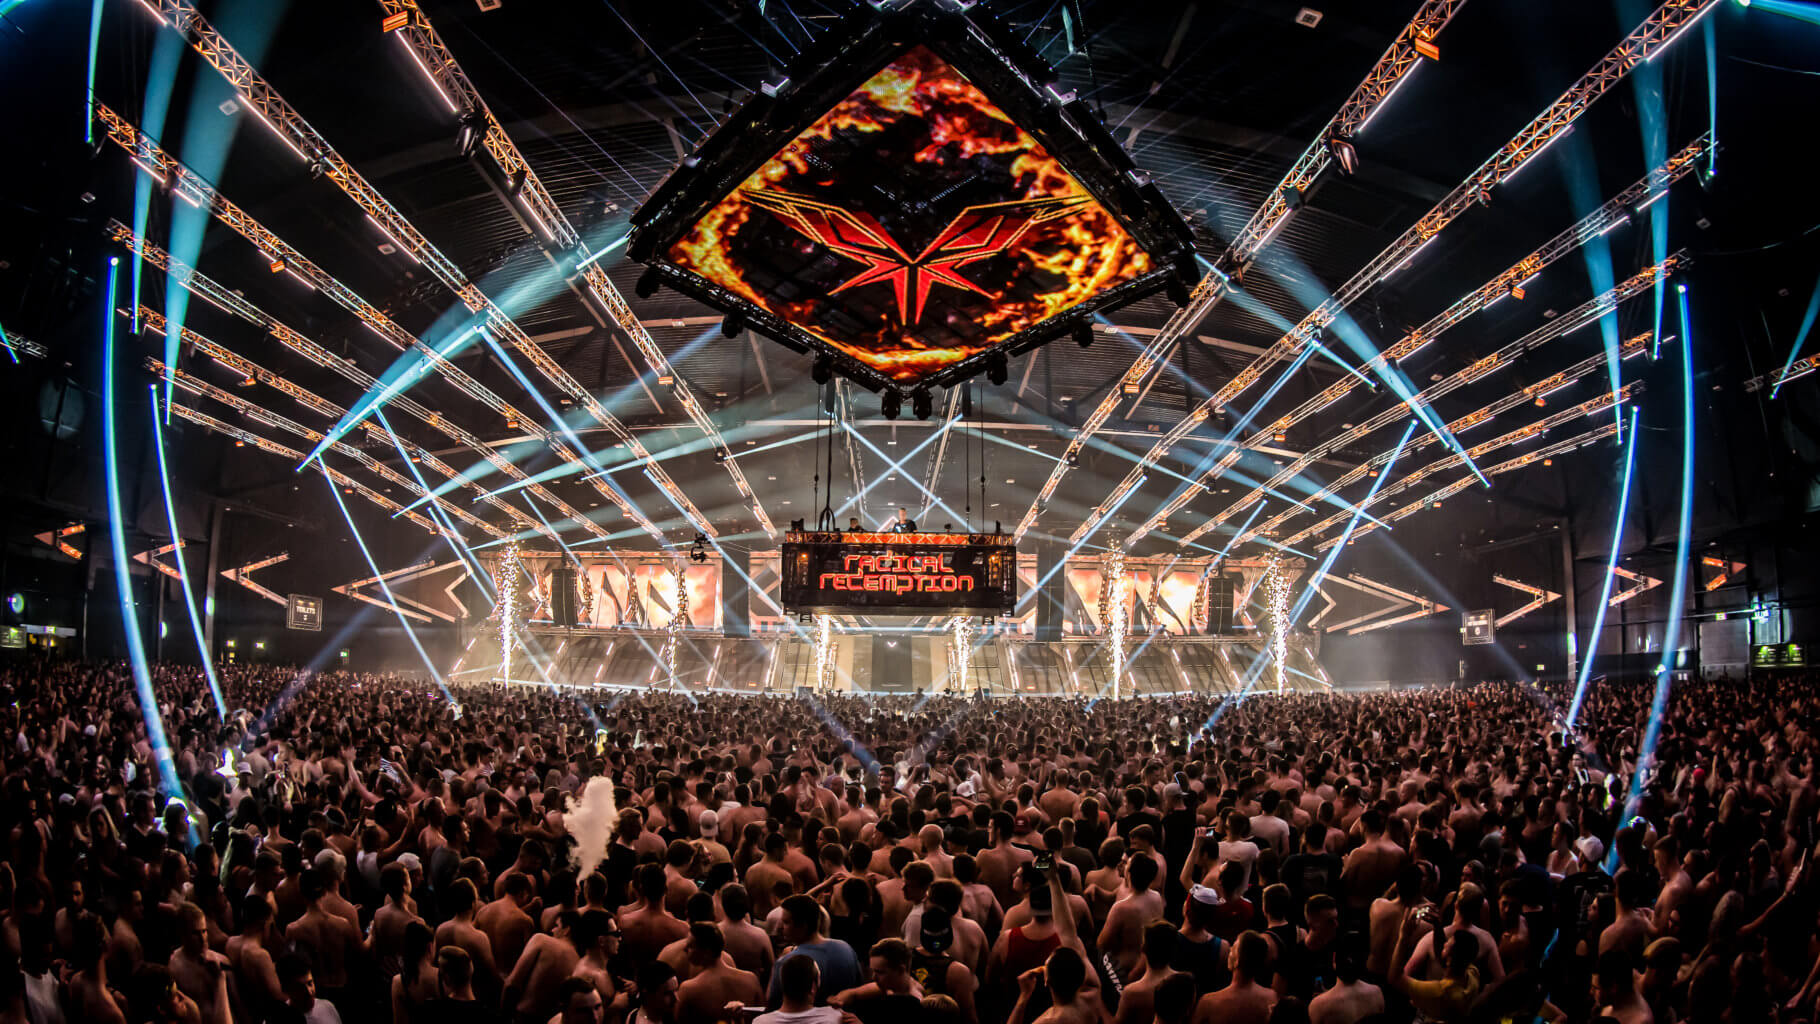 Watch the set of Radical Redemption at Supremacy now!